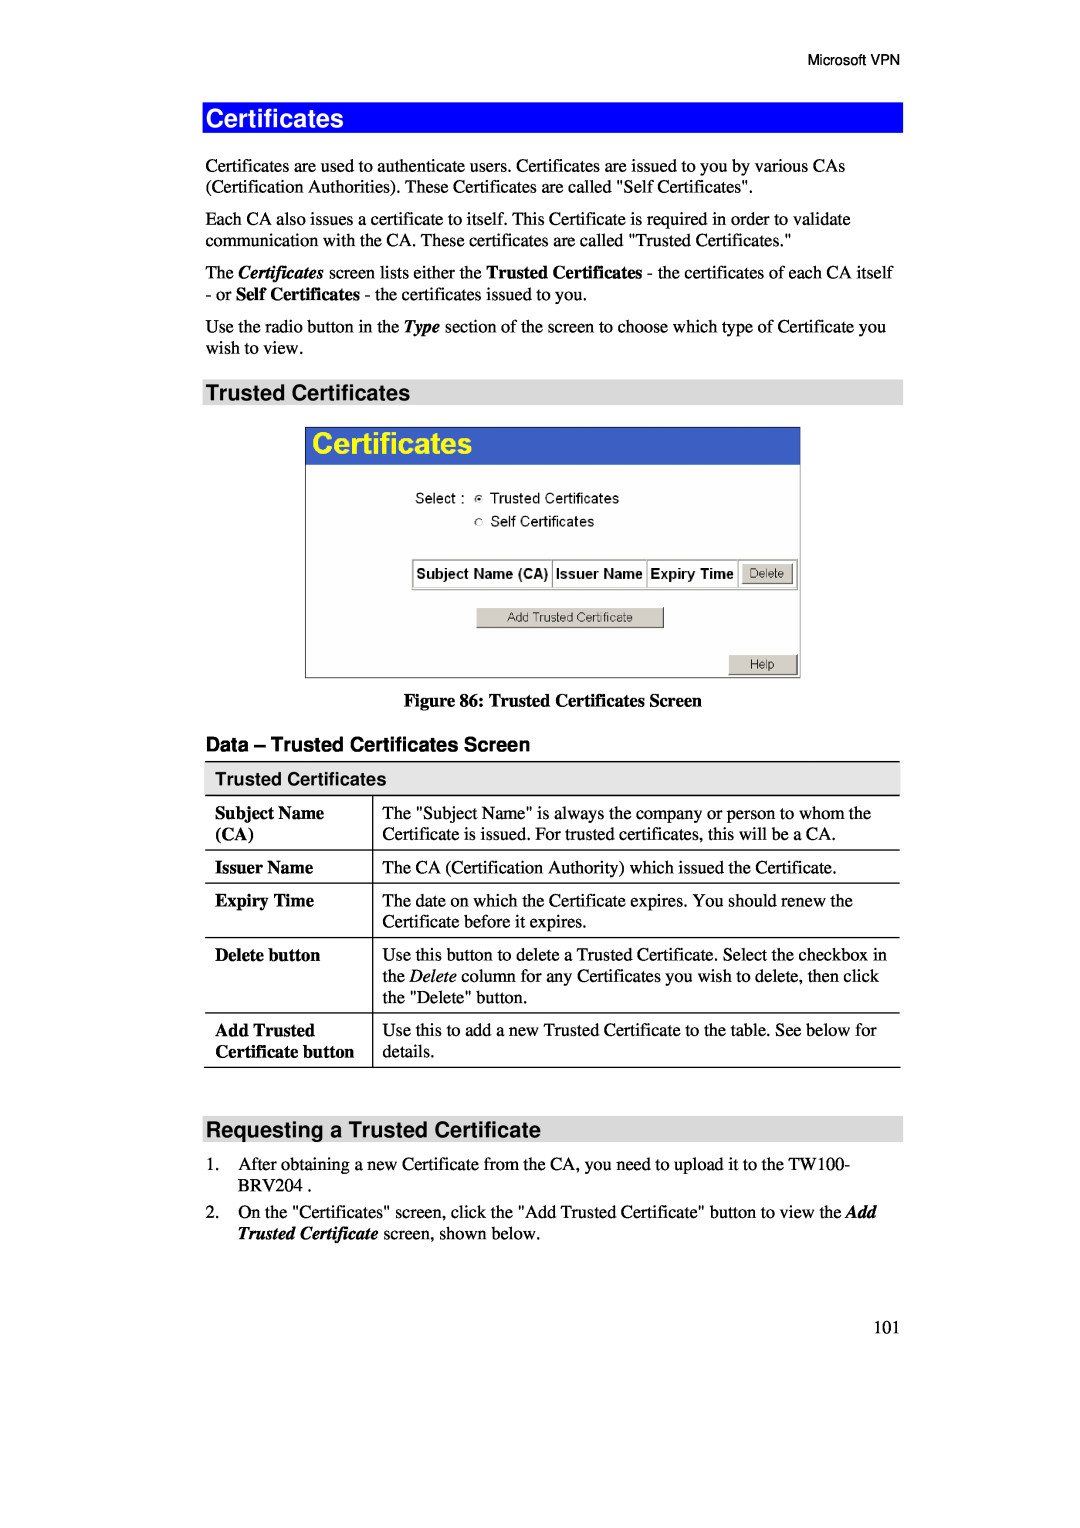 TRENDnet BRV204 manual Requesting a Trusted Certificate, Trusted Certificates Screen, Subject Name, Issuer Name 